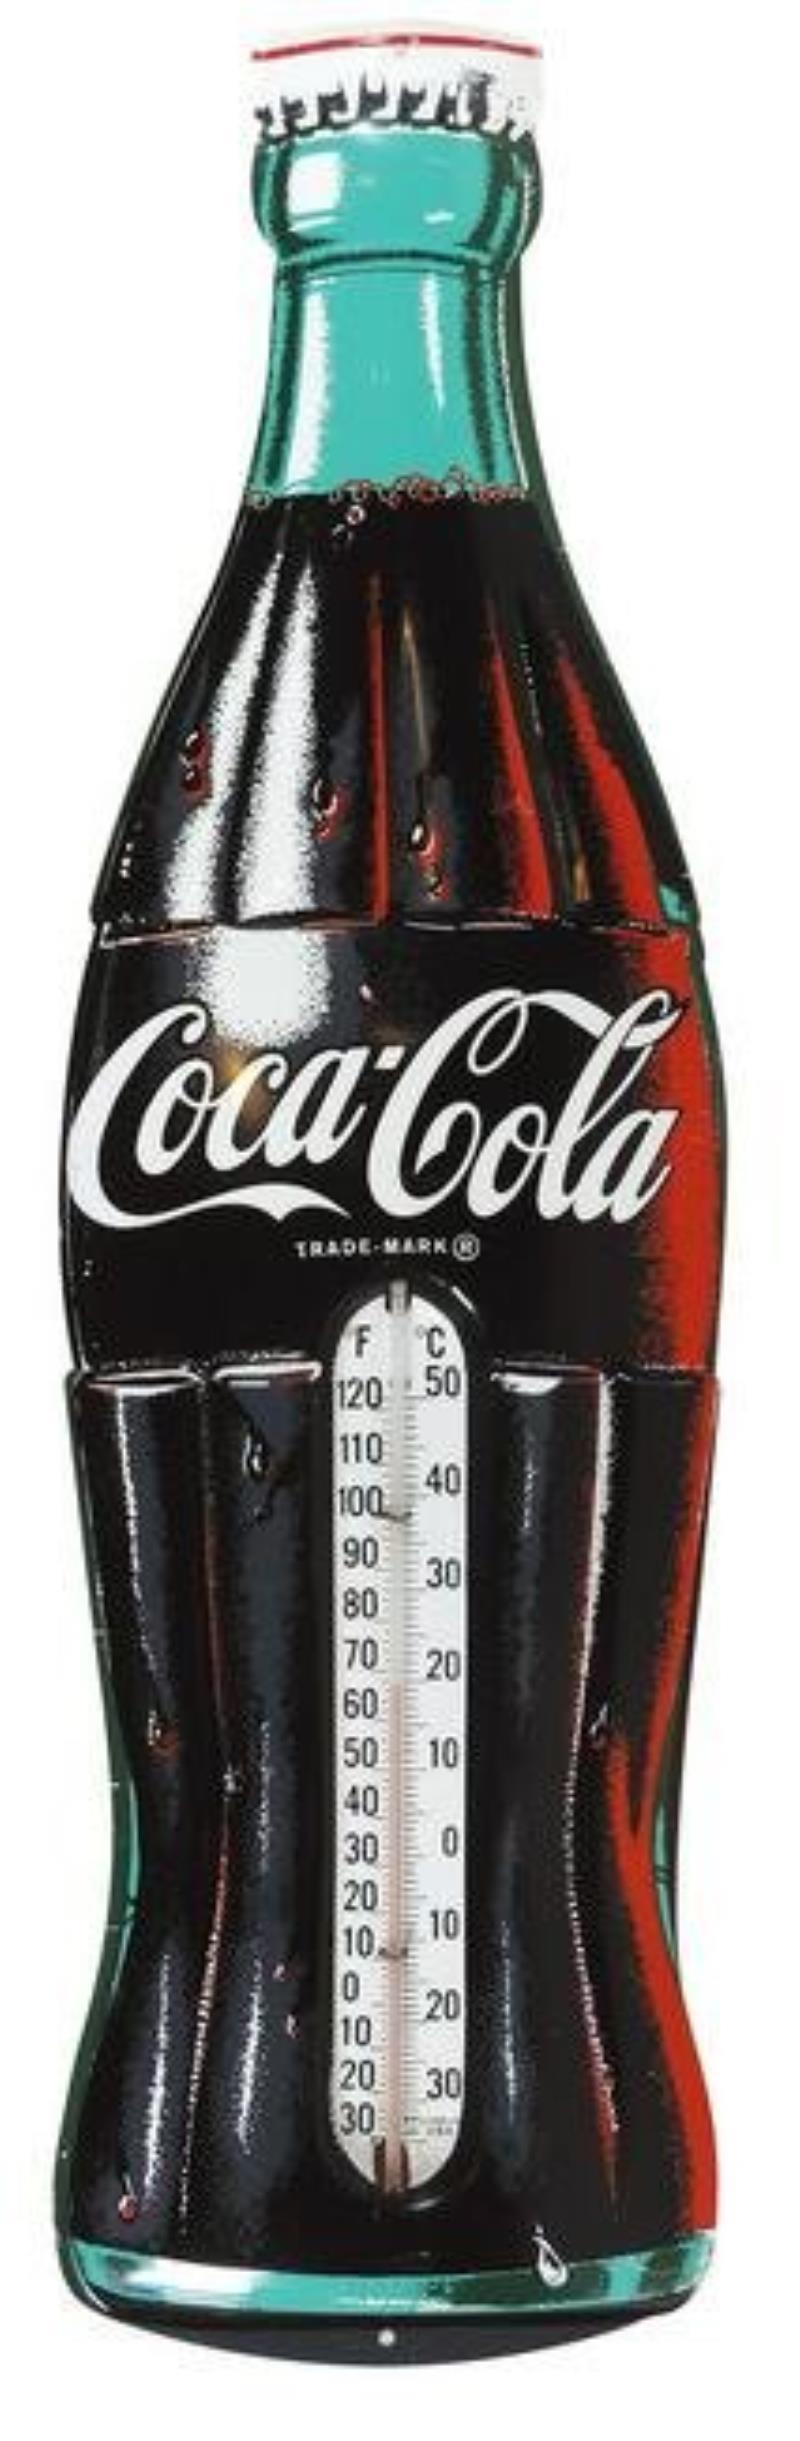 Coca-Cola Thermometer, bottle shaped, litho on embossed